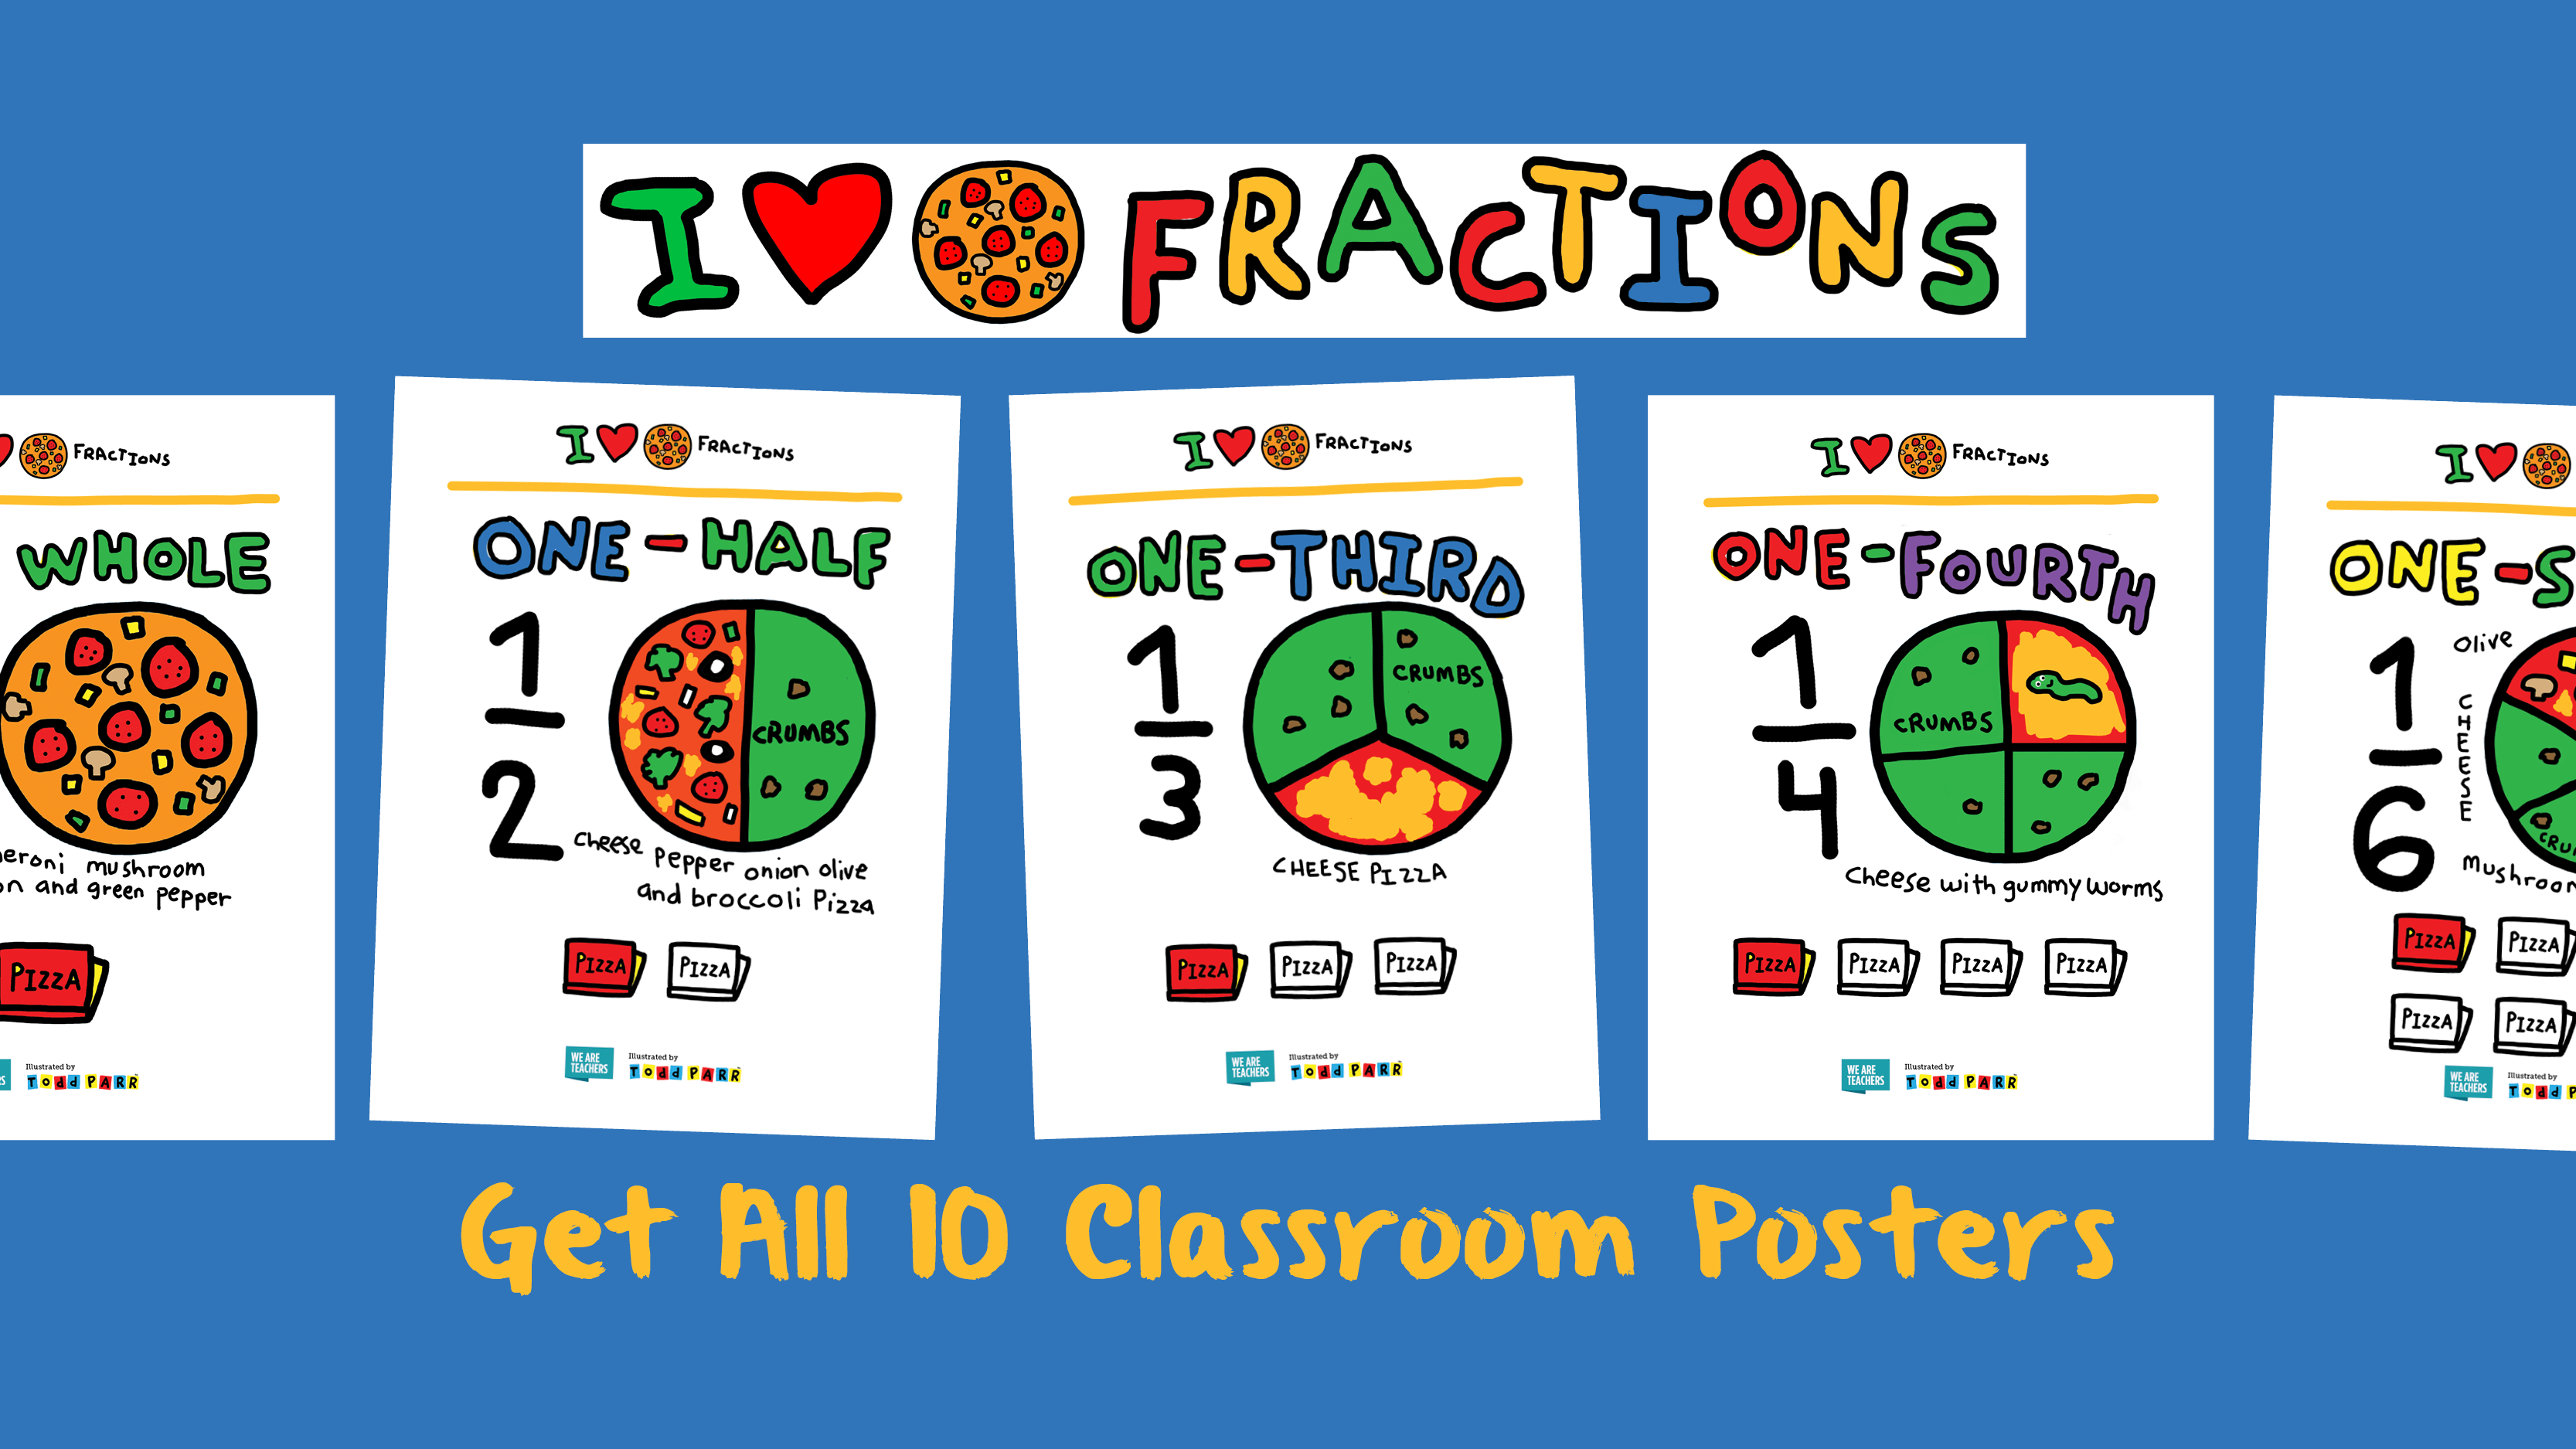 Pictures of pizza fraction posters illustrated by Todd Parr for We Are Teachers